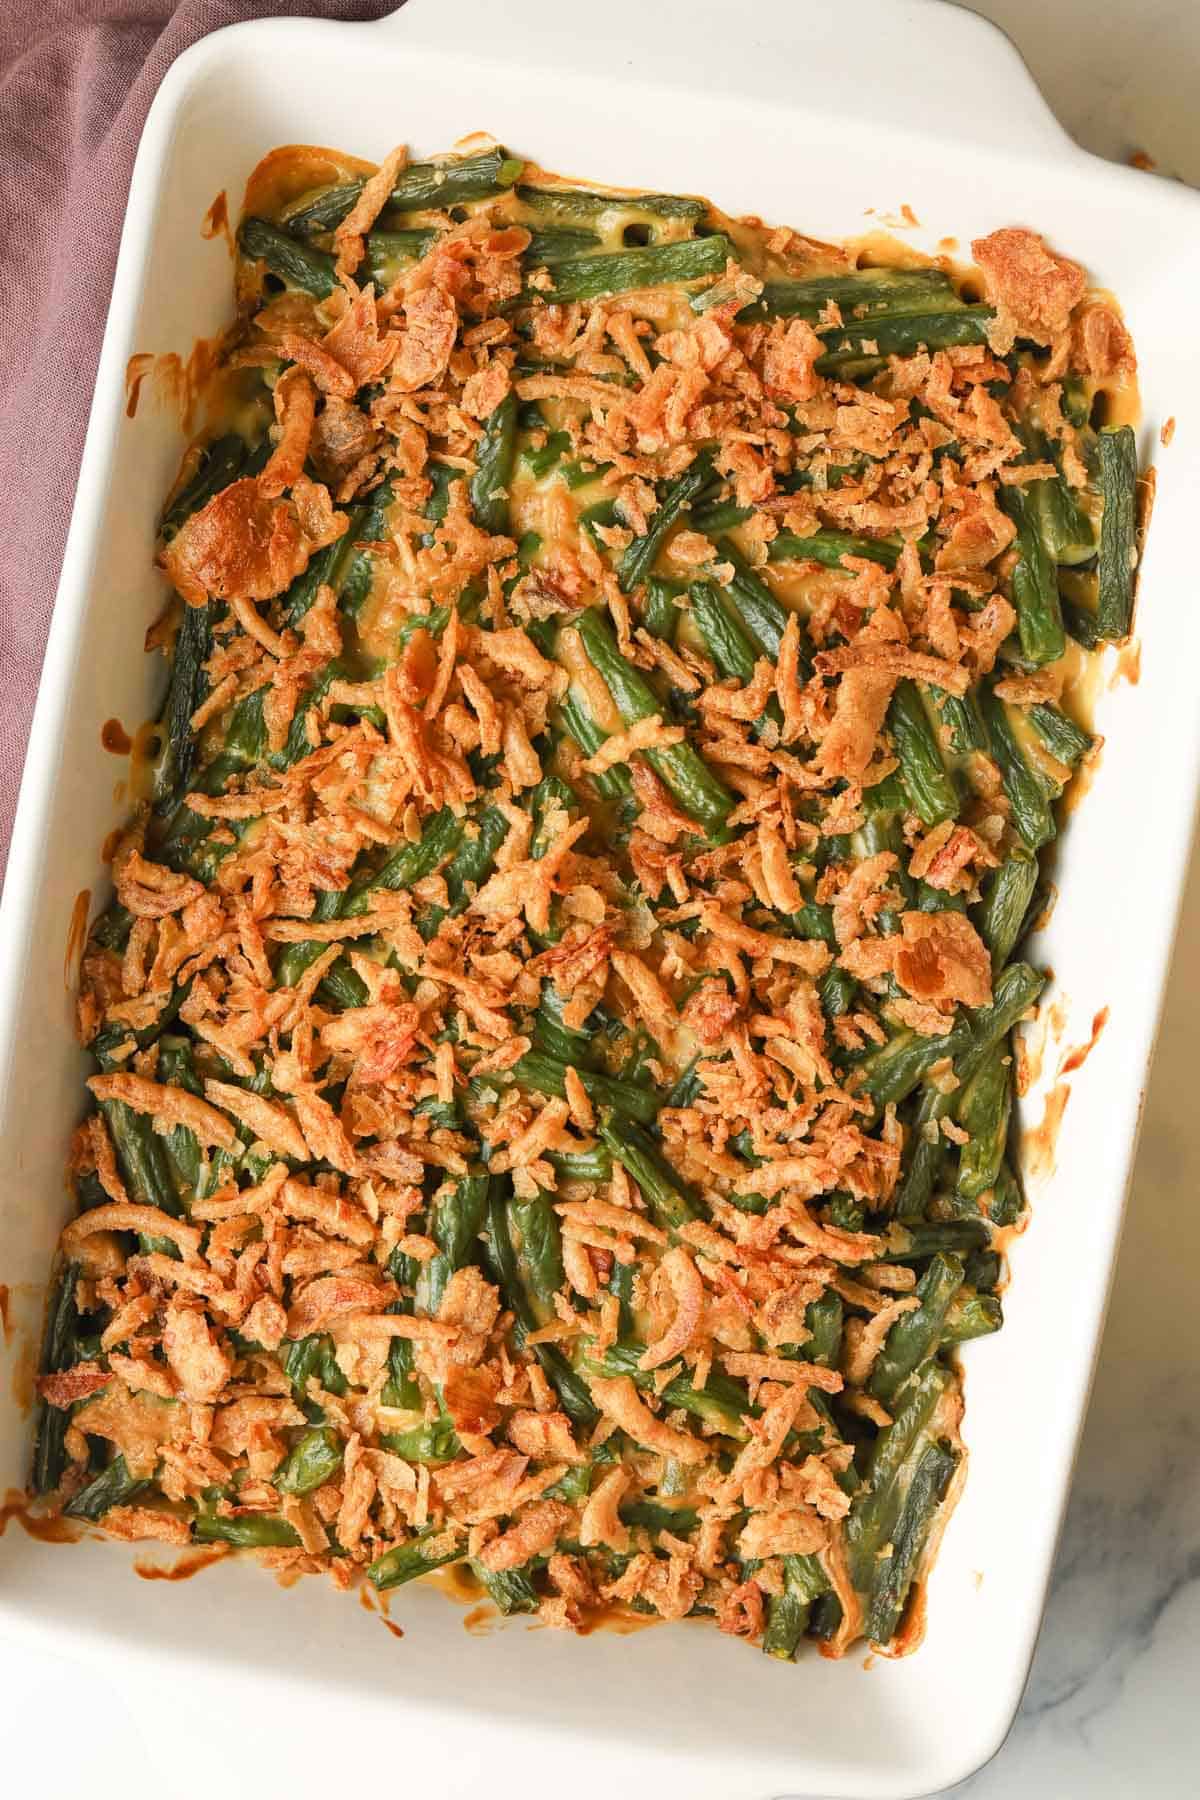 Green bean casserole with fried onions topping.